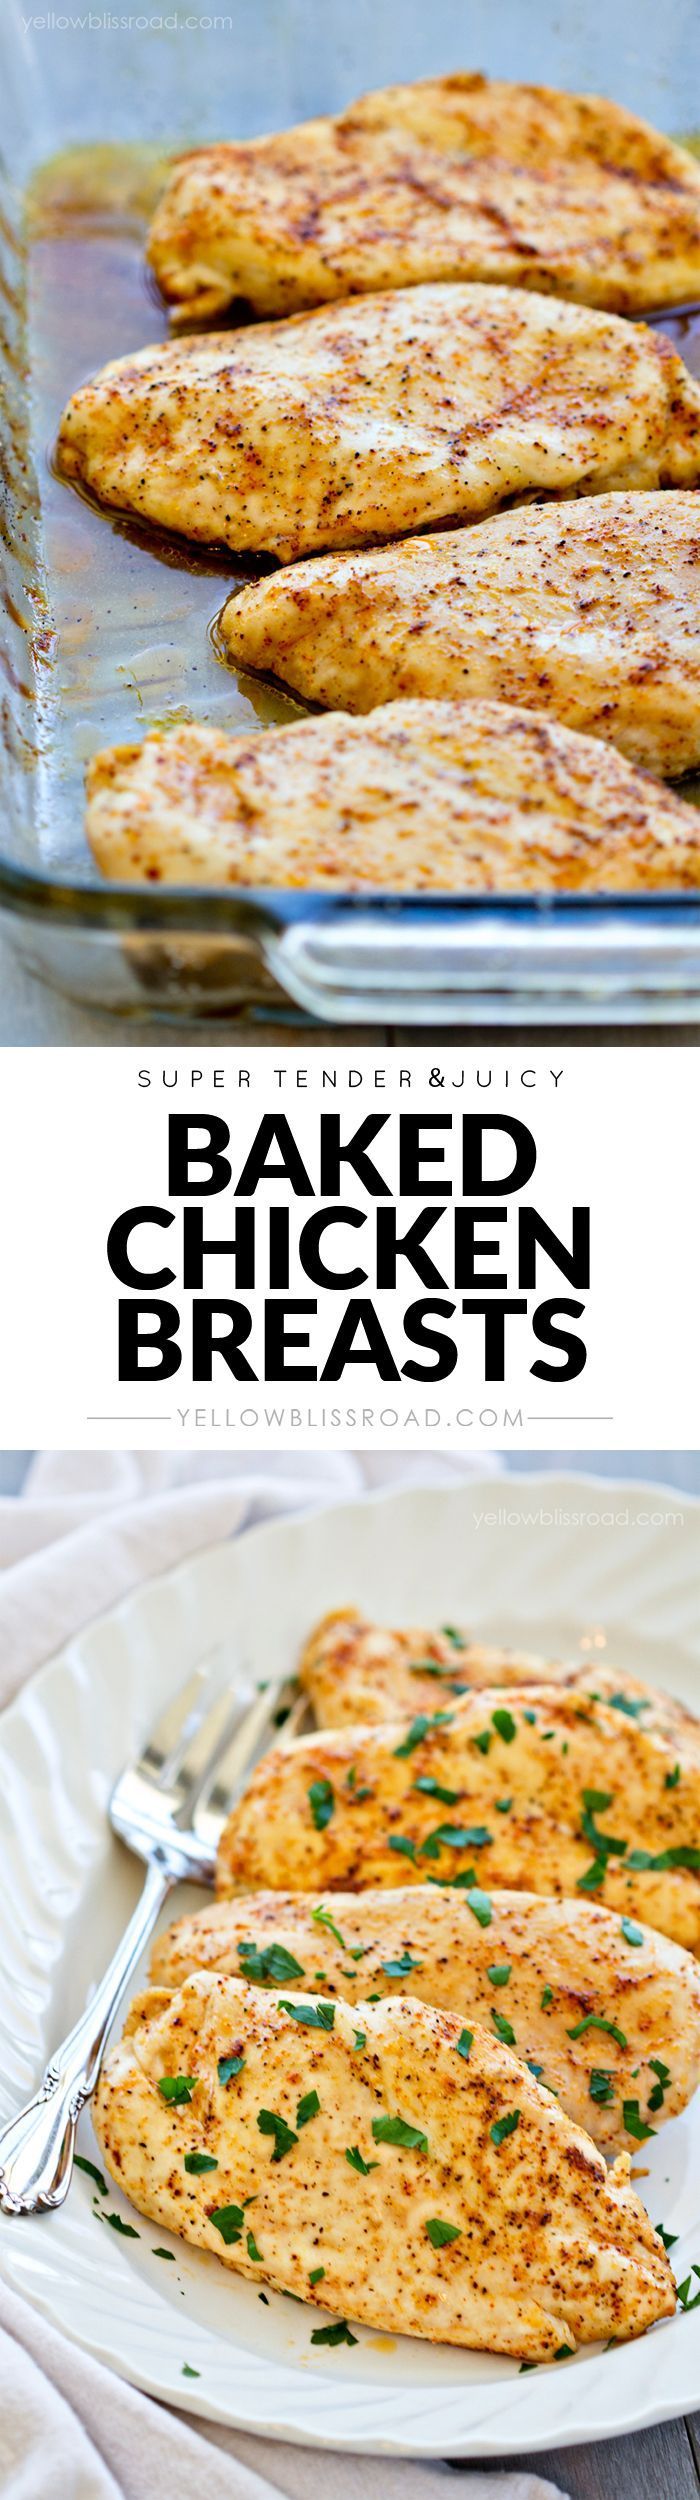 Tender & Juicy Baked Chicken Breasts – No more dry chicken!